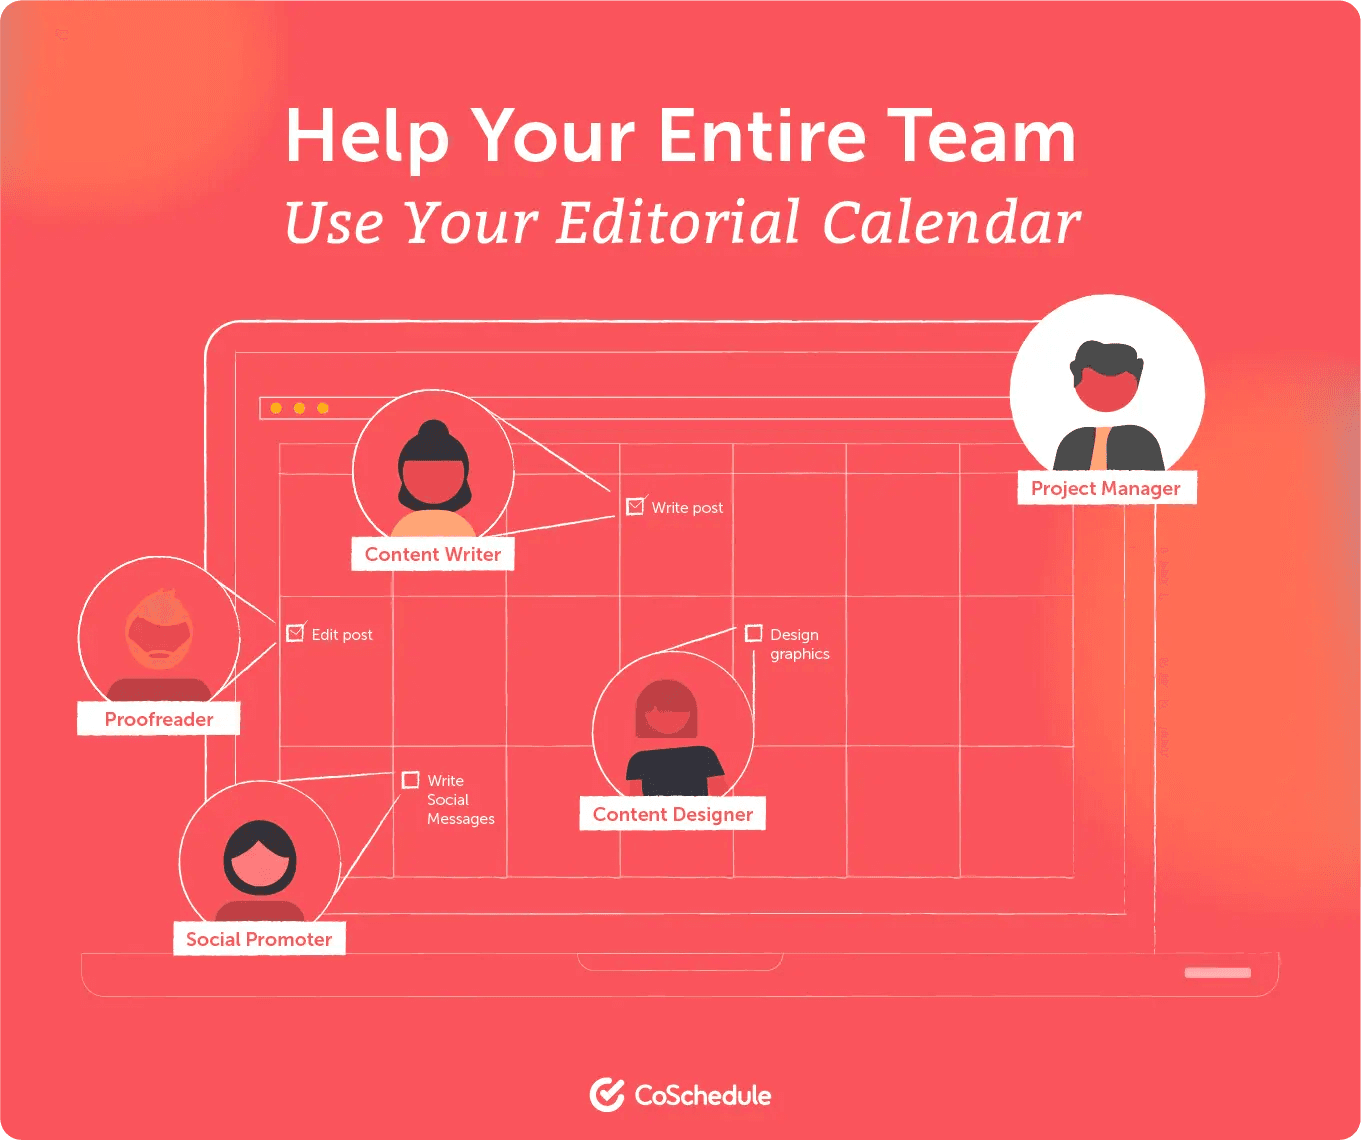 CoSchedule help your entire team use an editorial calendar 